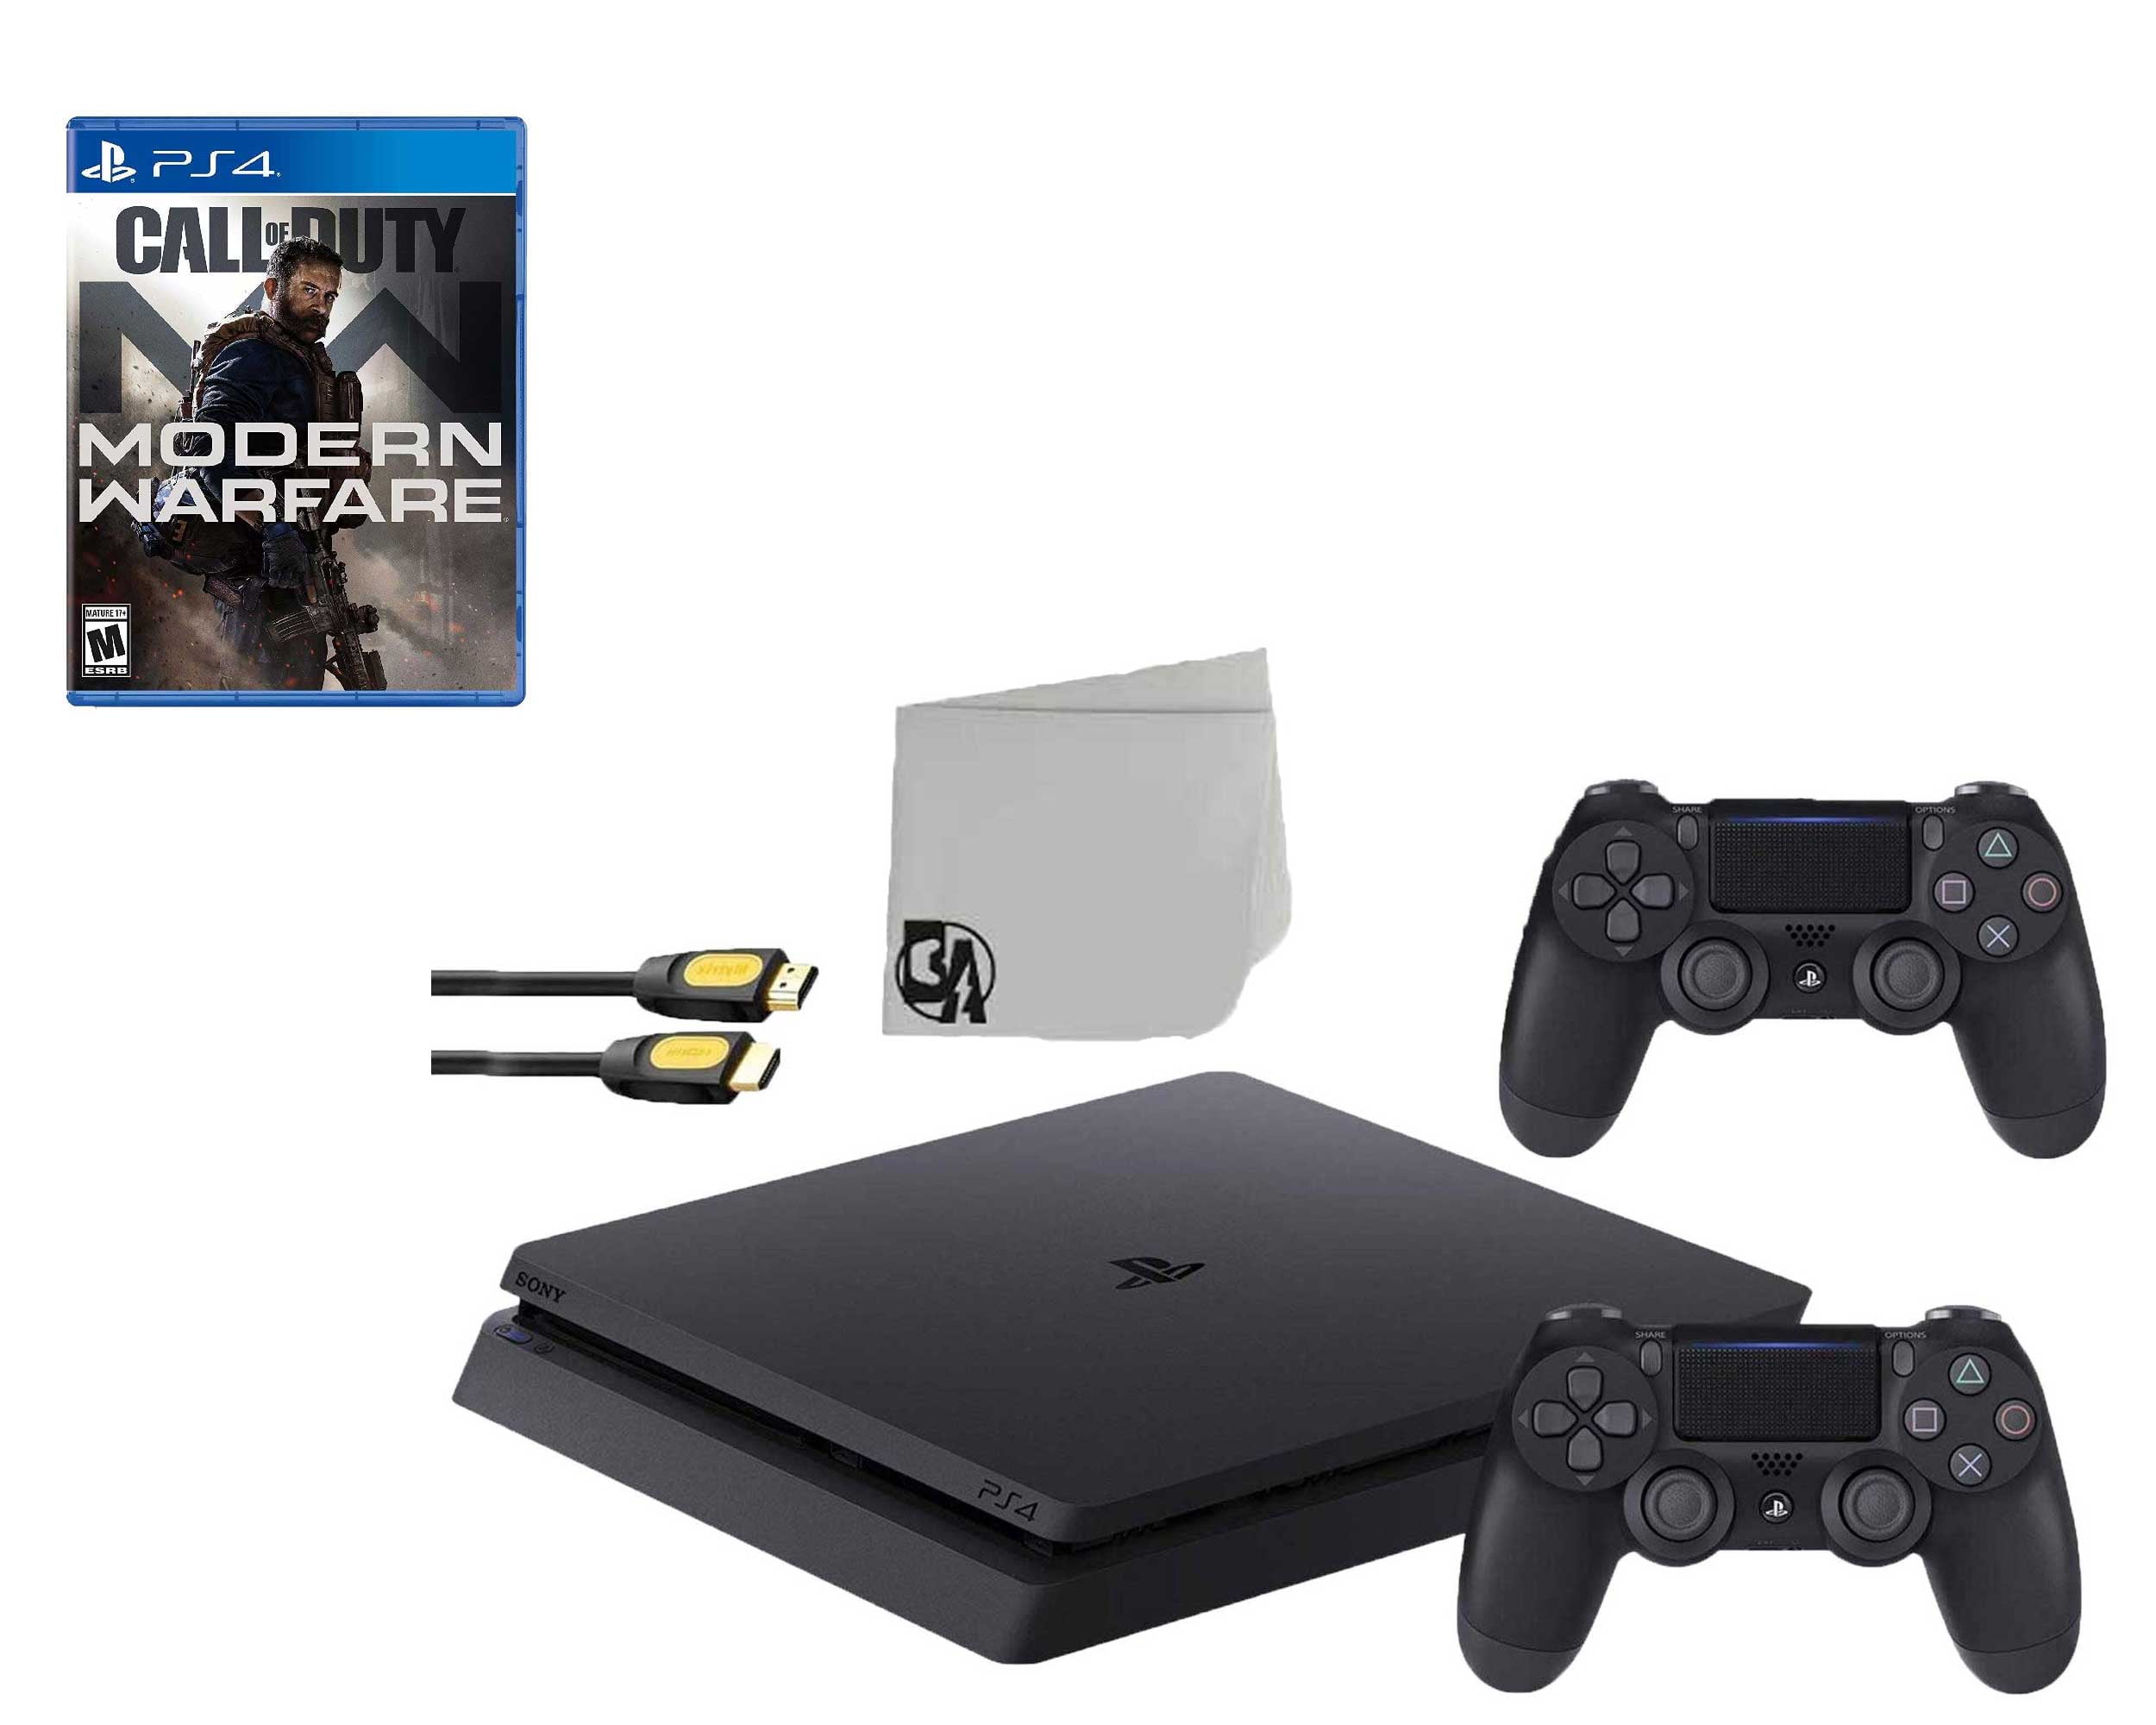 Sony 2215A PlayStation 4 Slim 500GB Gaming Console Black 2 Controller  Included with FIFA-20 Game BOLT AXTION Bundle Lke New